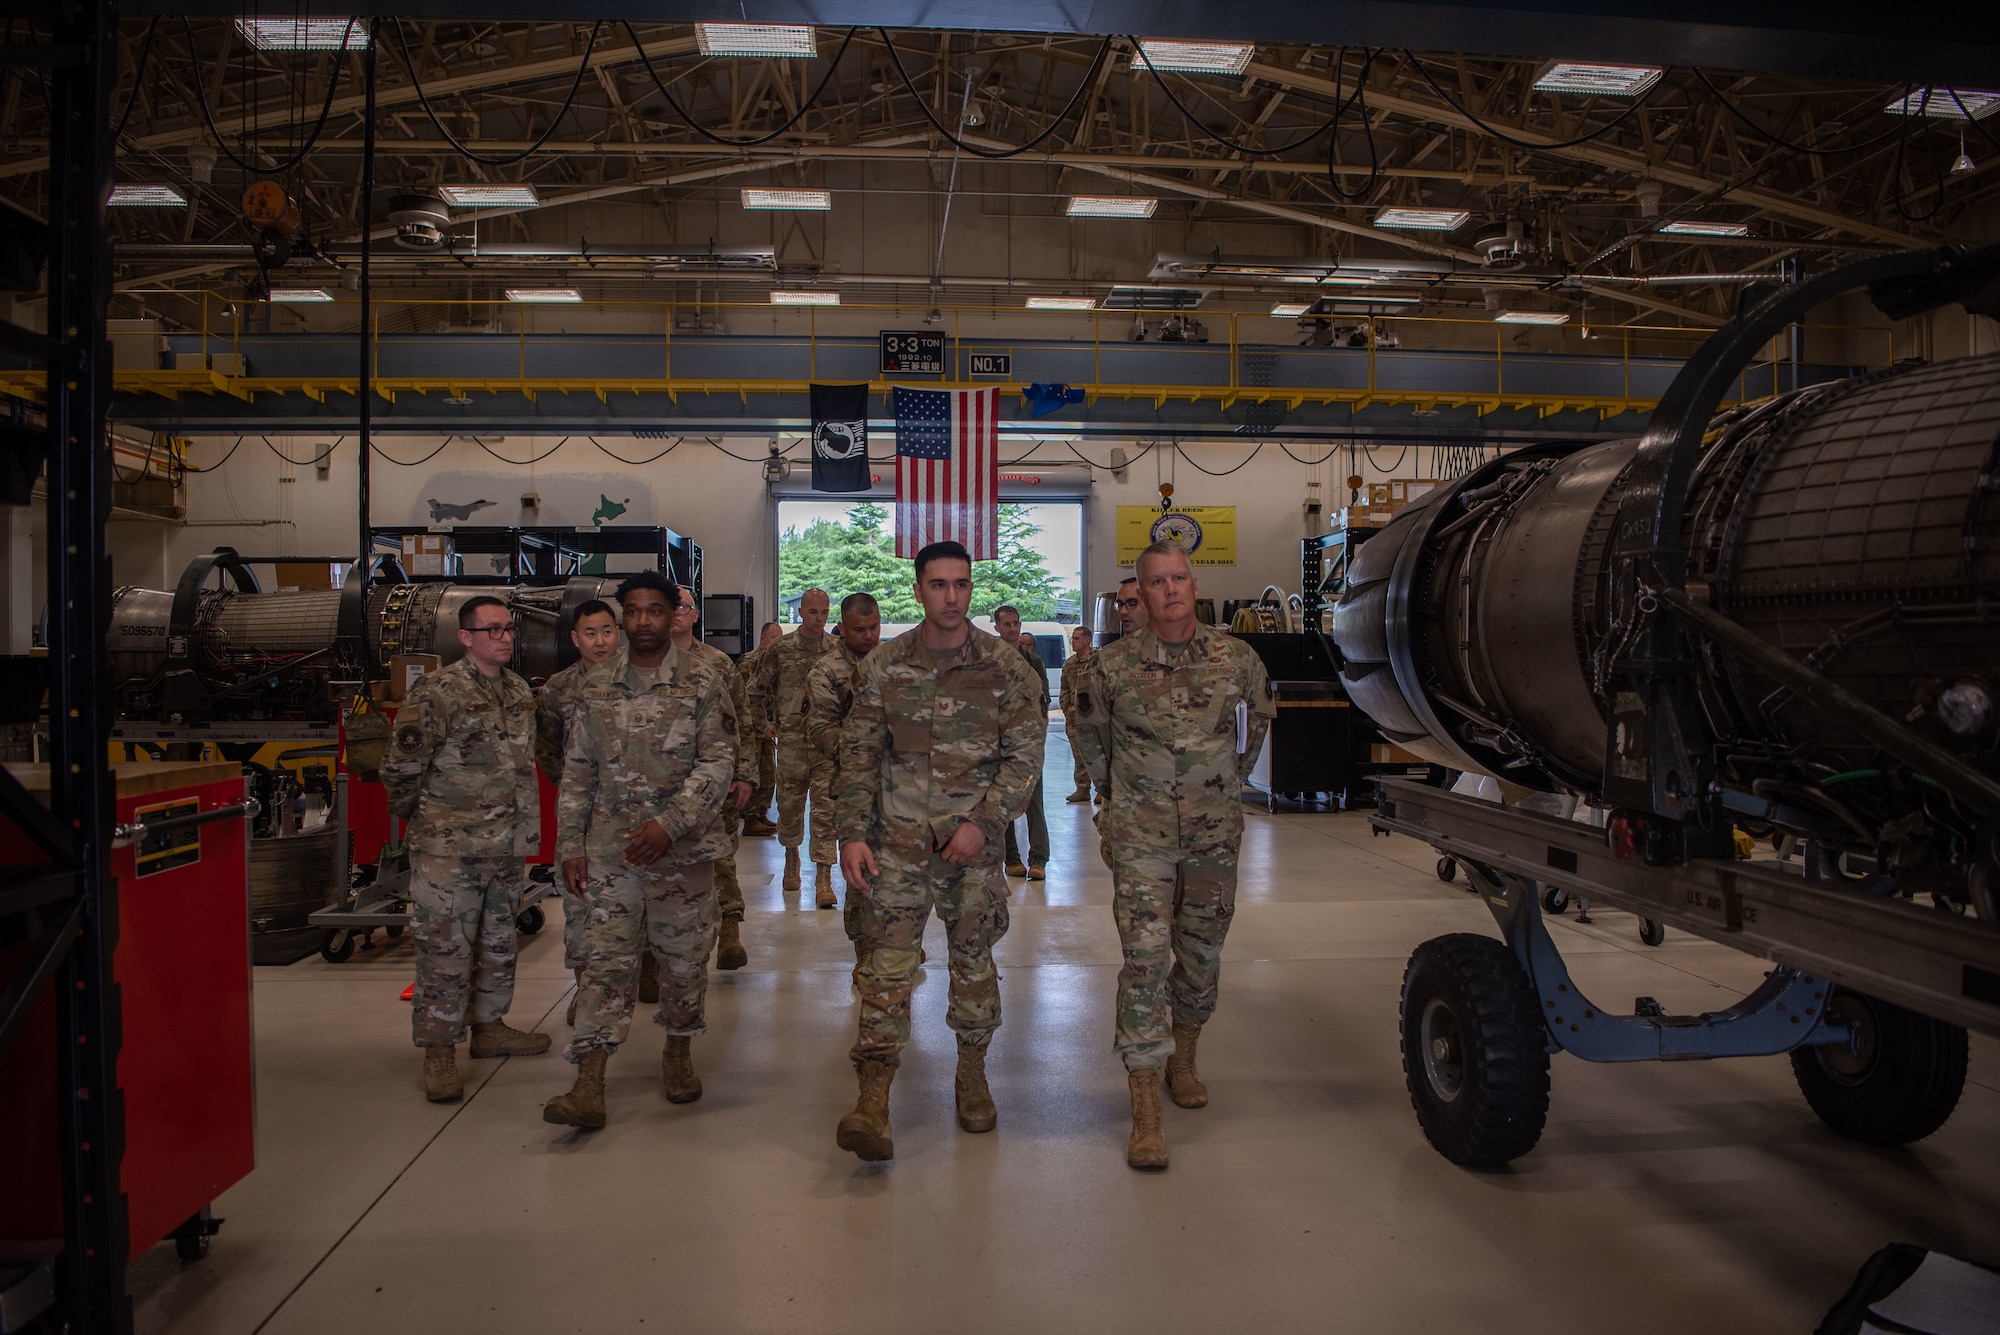 U.S. military members in uniform walk through a hanger working on F-16 Fighting Falcon engines.